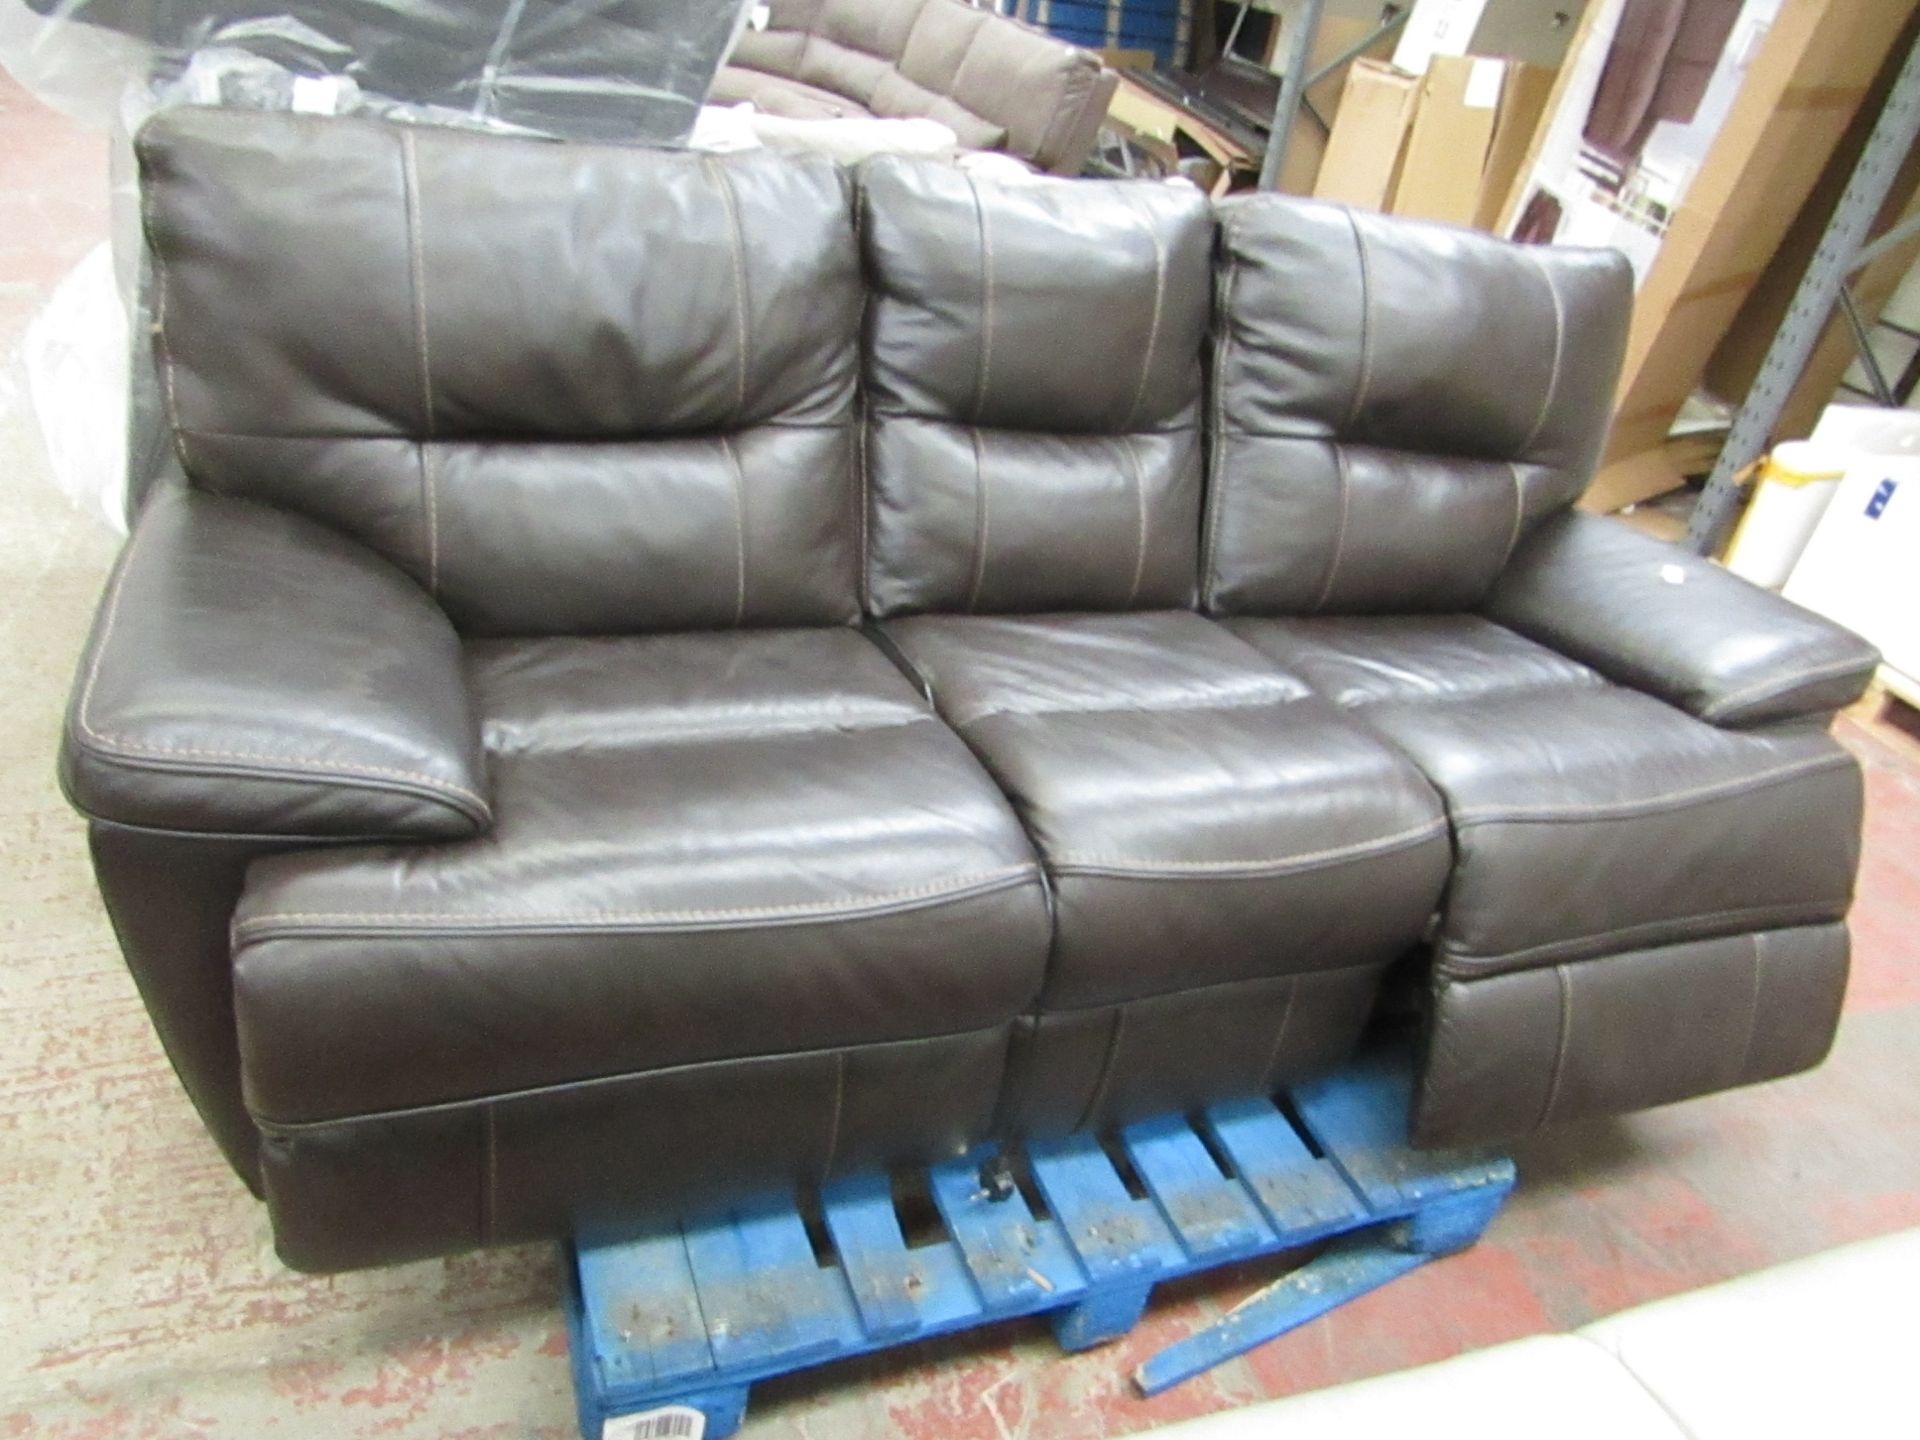 3 Seater brown electric reclining sofa, tested working